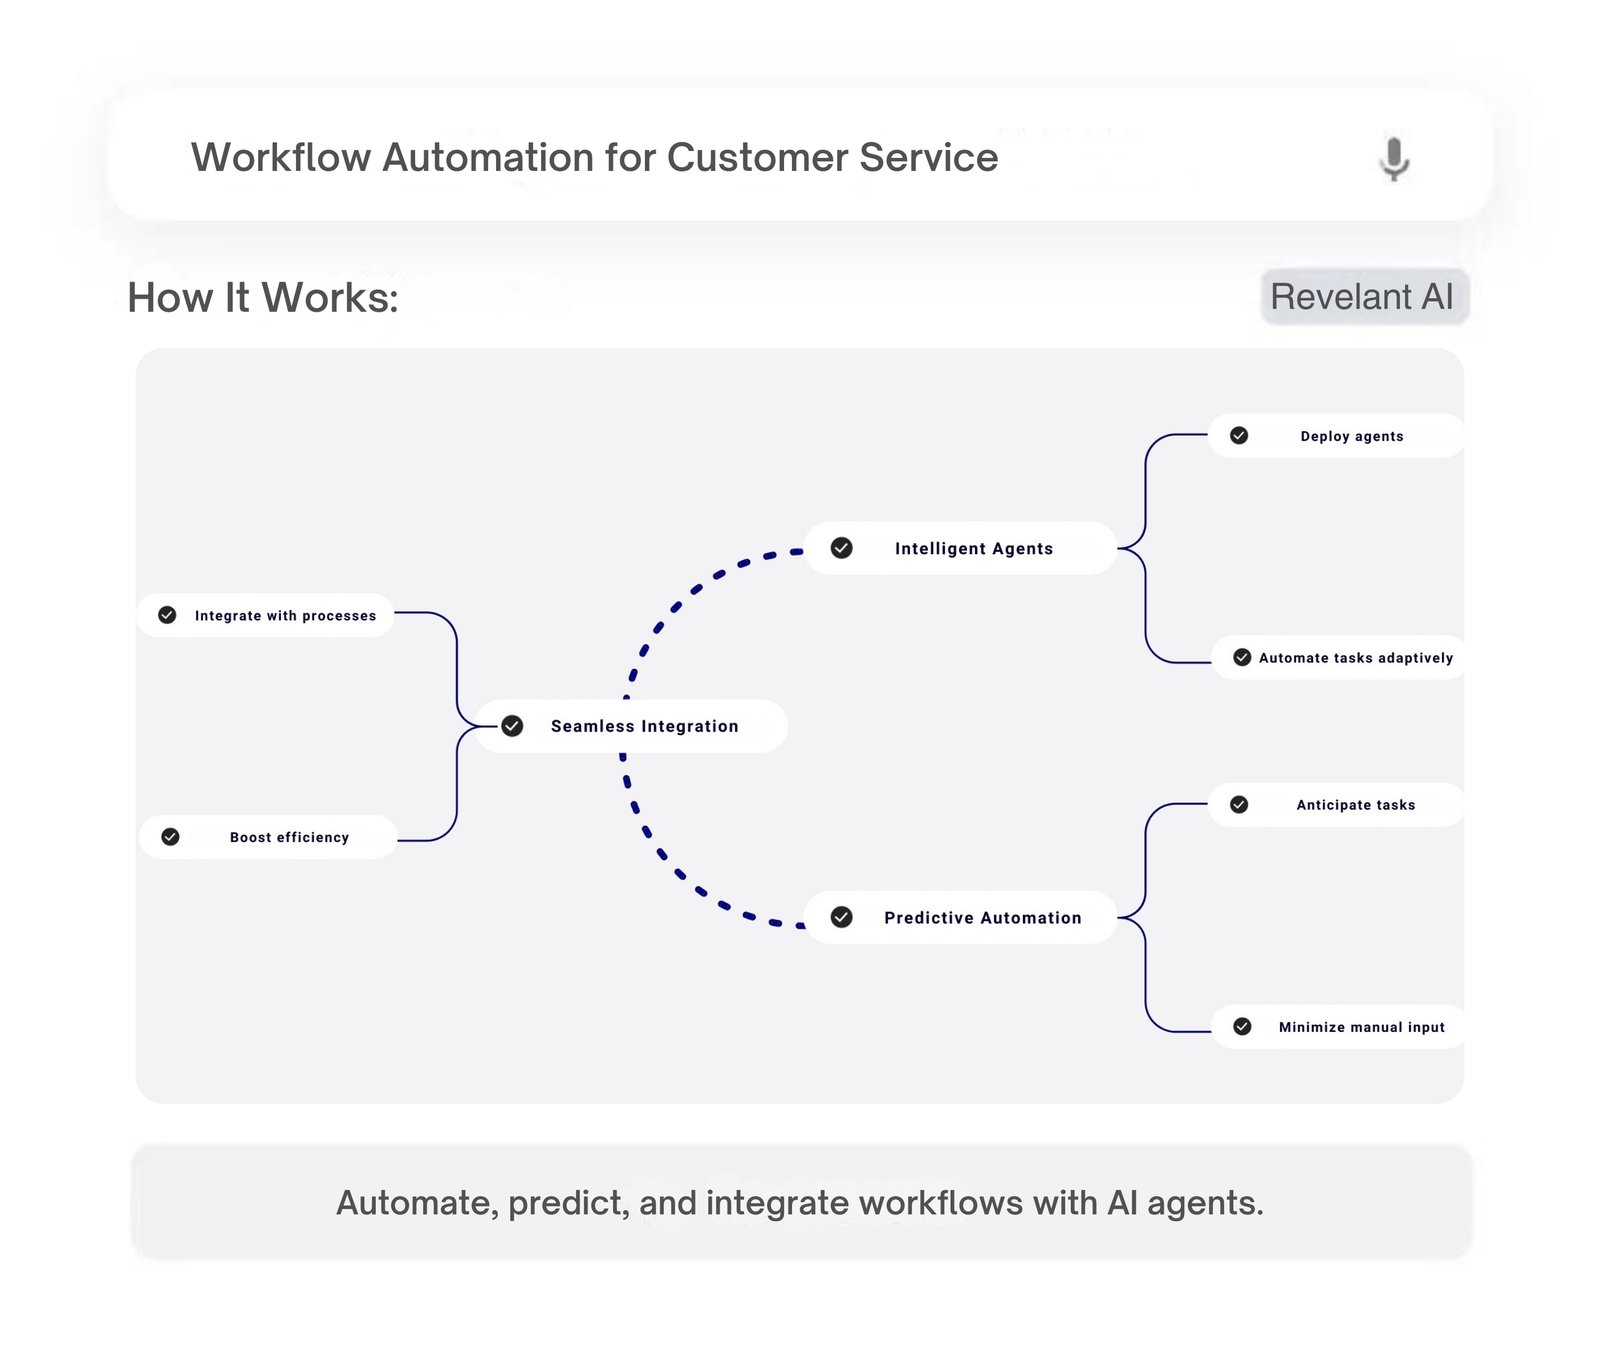 Diagram explaining how Workflow Automation integrates with customer service through seamless integration, intelligent agents, and predictive automation.